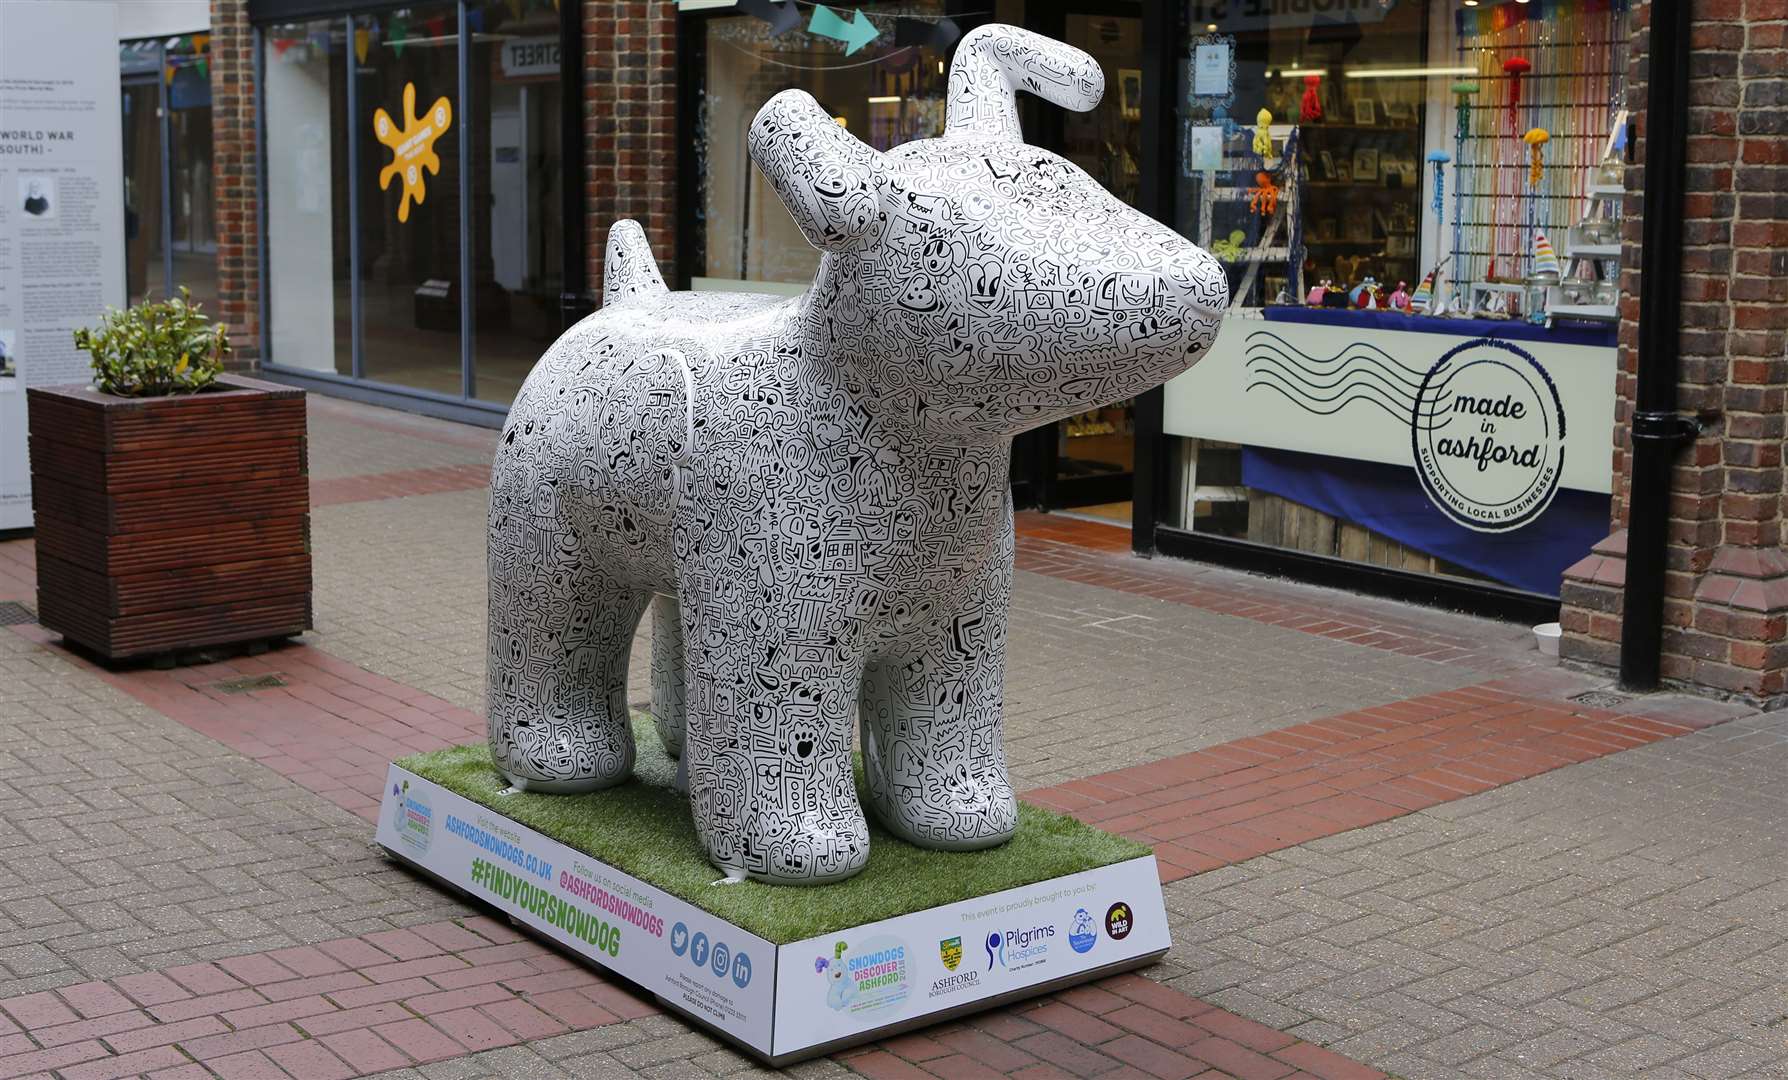 Doodle Dog by Mr Doodle was part of the Snowdogs trail in 2018